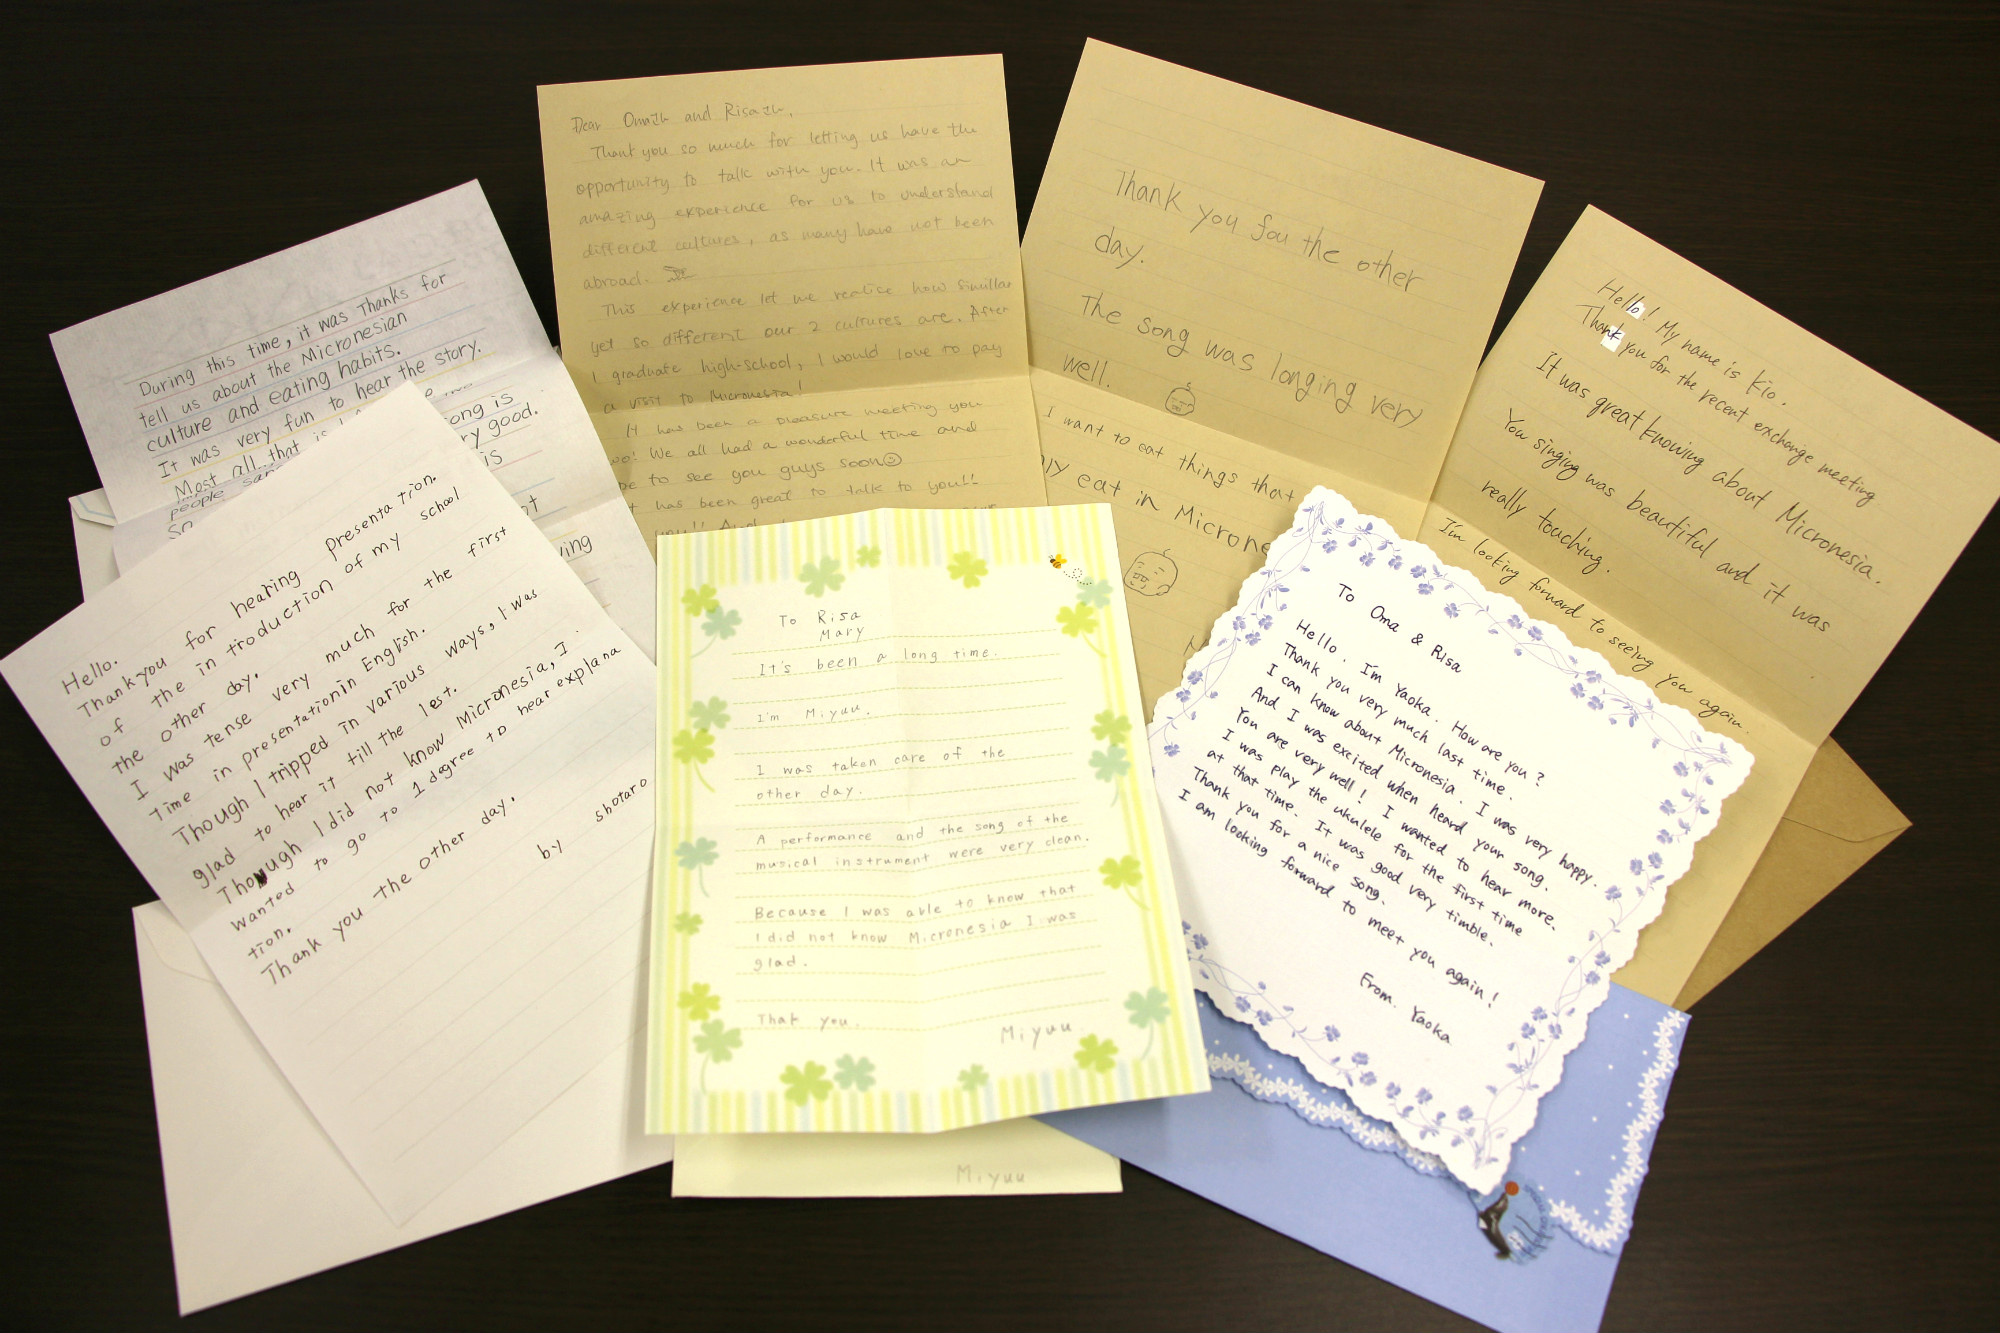 Thank-you Letters from Students at Shotoku Gakuen Junior and Senior High School